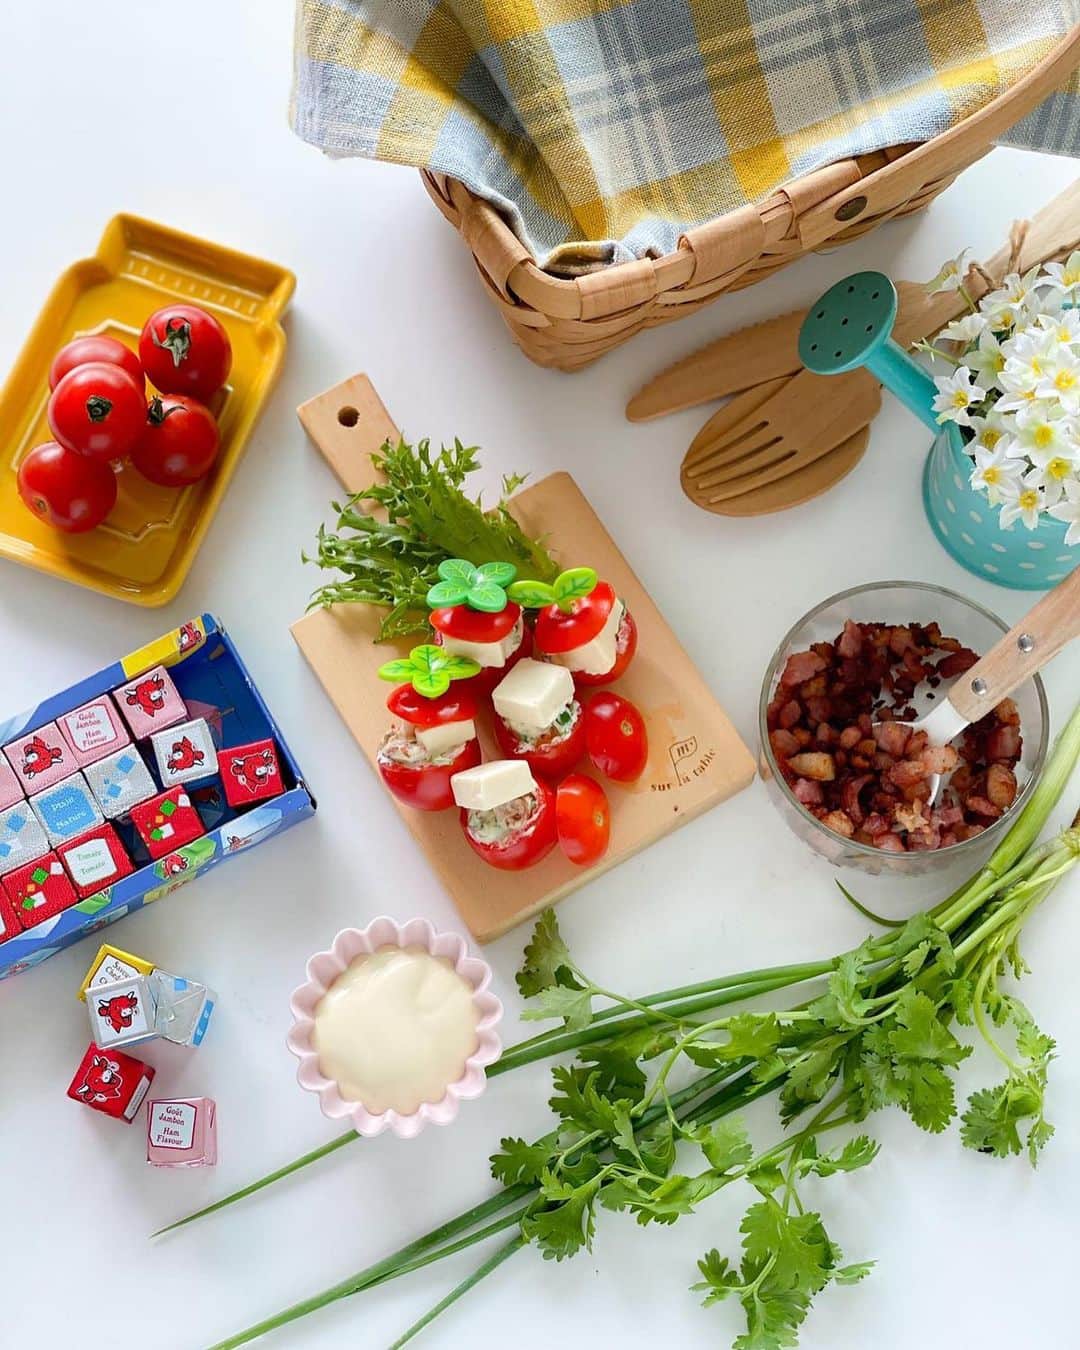 Little Miss Bento・Shirley シャリーさんのインスタグラム写真 - (Little Miss Bento・Shirley シャリーInstagram)「Here is a gorgeous bento featuring my recipes using The Laughing Cow®️ cheese that would make a Lovely Indoor Picnic Along with Your Child!   The versatility of The Laughing Cow®️ cheese make them great for creating a wide range of tasty and nutritious meals and snacks for the whole family.   Check out comments for my recipes! - 𝐂𝐡𝐞𝐫𝐫𝐲 𝐭𝐨𝐦𝐚𝐭𝐨 𝐜𝐮𝐩𝐬 𝐰𝐢𝐭𝐡 𝐁𝐞𝐥𝐜𝐮𝐛𝐞𝐬, 𝐜𝐨𝐫𝐧 𝐚𝐧𝐝 𝐛𝐚𝐜𝐨𝐧 𝐬𝐭𝐮𝐟𝐟𝐢𝐧𝐠 - 𝐒𝐮𝐬𝐡𝐢 𝐫𝐨𝐥𝐥𝐬 𝐰𝐢𝐭𝐡 𝐁𝐞𝐥𝐜𝐮𝐛𝐞𝐬 (𝟐 𝐫𝐨𝐥𝐥𝐬) - 𝐓𝐫𝐢𝐚𝐧𝐠𝐮𝐥𝐚𝐫 𝐦𝐨𝐮𝐬𝐞 𝐨𝐧 𝐬𝐚𝐥𝐚𝐝 𝐠𝐫𝐞𝐞𝐧𝐬  #snackyourway #thelaughingcowsg  July 2020 Promotions • The Laughing Cow®️ Belcubes 15c, Assorted – 2 For $7.05  • The Laughing Cow®️ Belcubes 24c, Assorted – 1 For $5.25  Promotions are available at Cold Storage, Giant, NTUC, Sheng Siong, Isetan, Mediya Redmart and Mustafa.」7月7日 10時42分 - littlemissbento